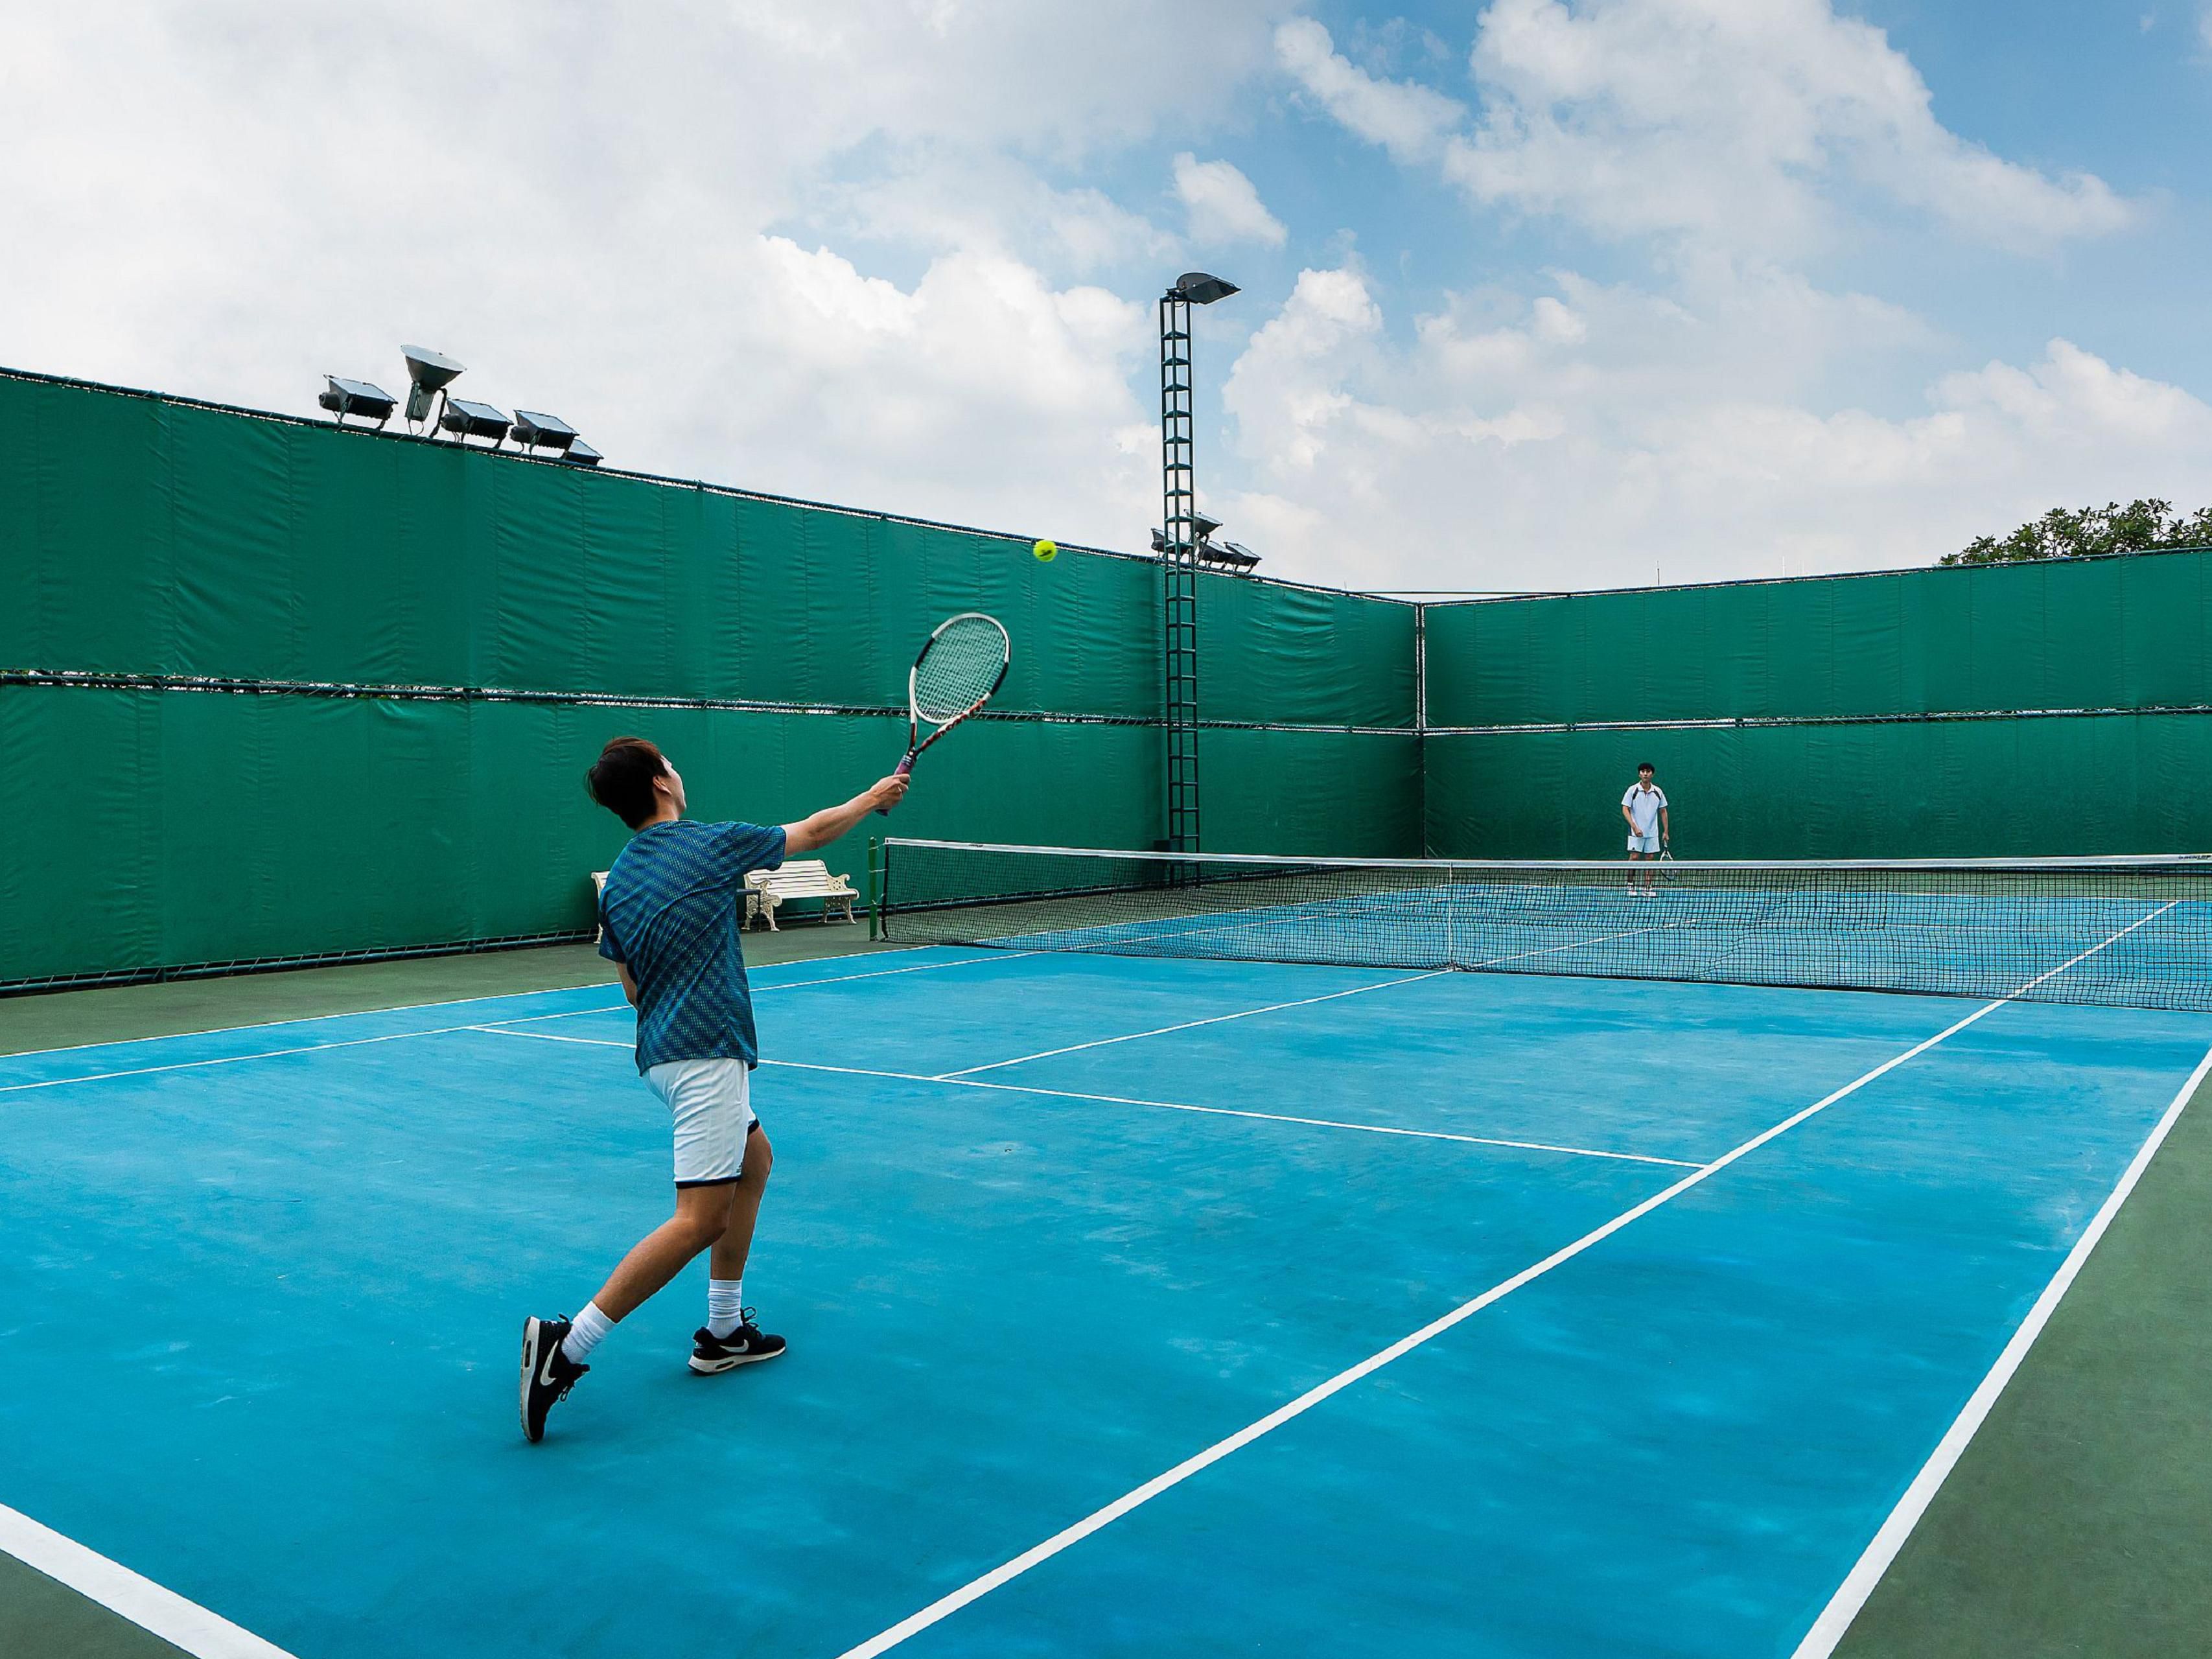 Stay fit and firm in the gym room, equipped with modern sports facilities tailored to meet your needs. Additionally, enjoy our outdoor tennis court, complete with convenient amenities like private lockers and a shower room.